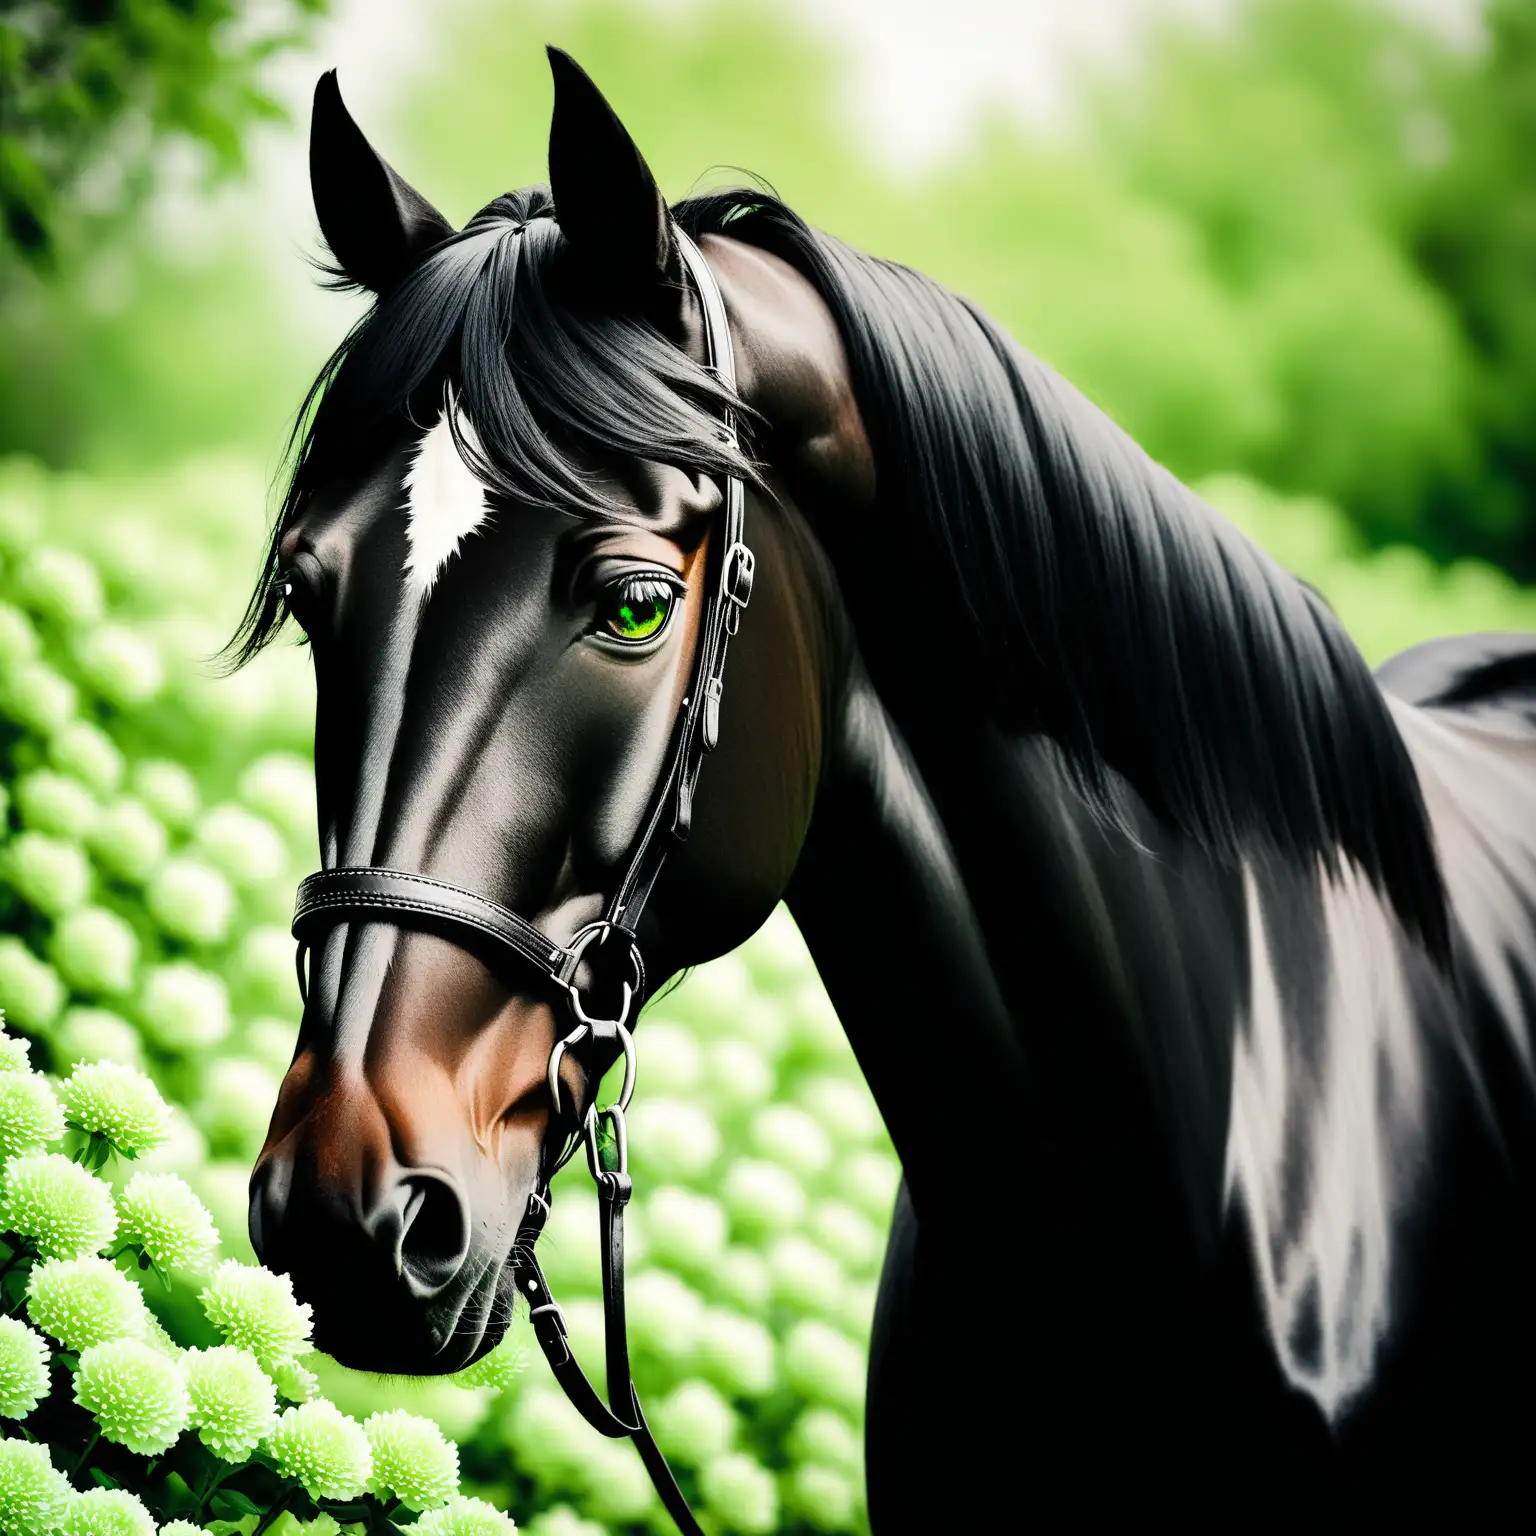 Black horse with green eyes, close up, green colored flowers in the background, black and white photography, artistic style 